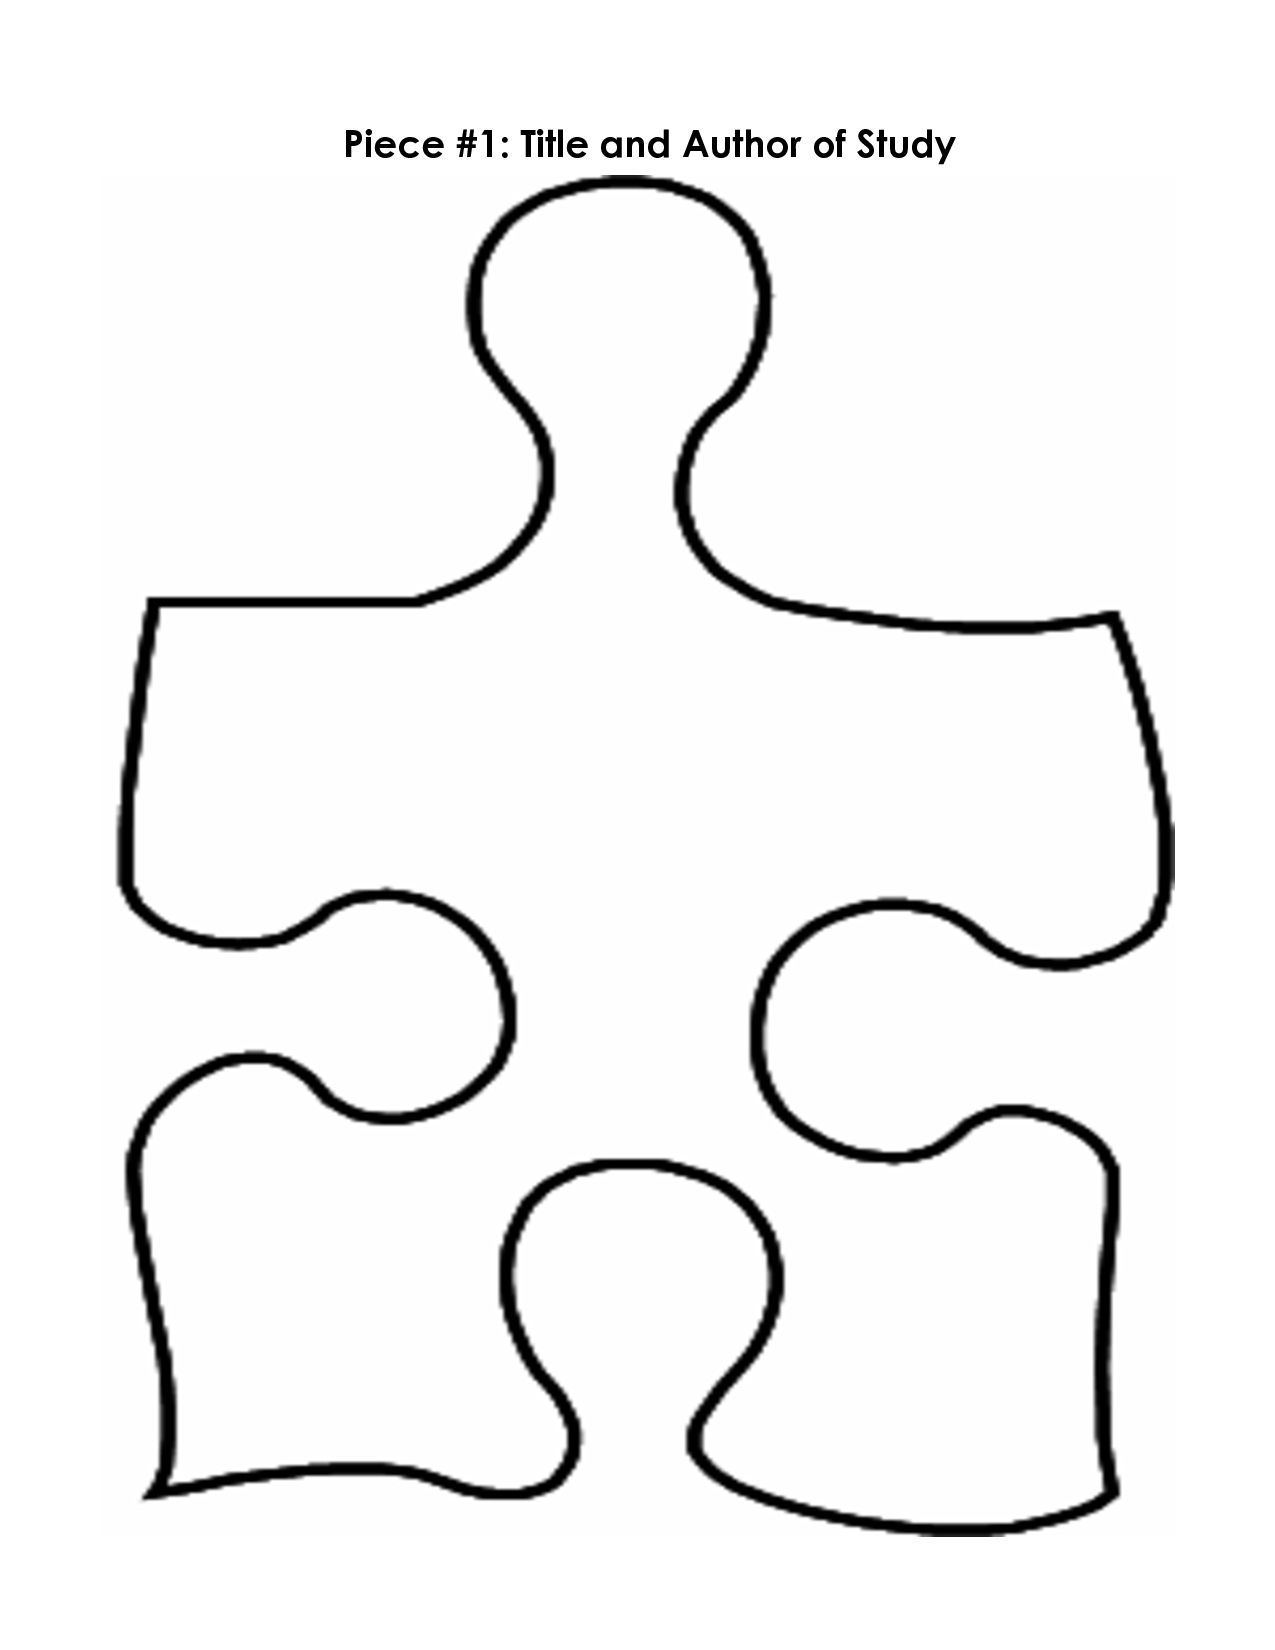 Free 3 Piece Jigsaw Puzzle Template, Download Free Clip Art, Free - 5 Piece Printable Puzzle